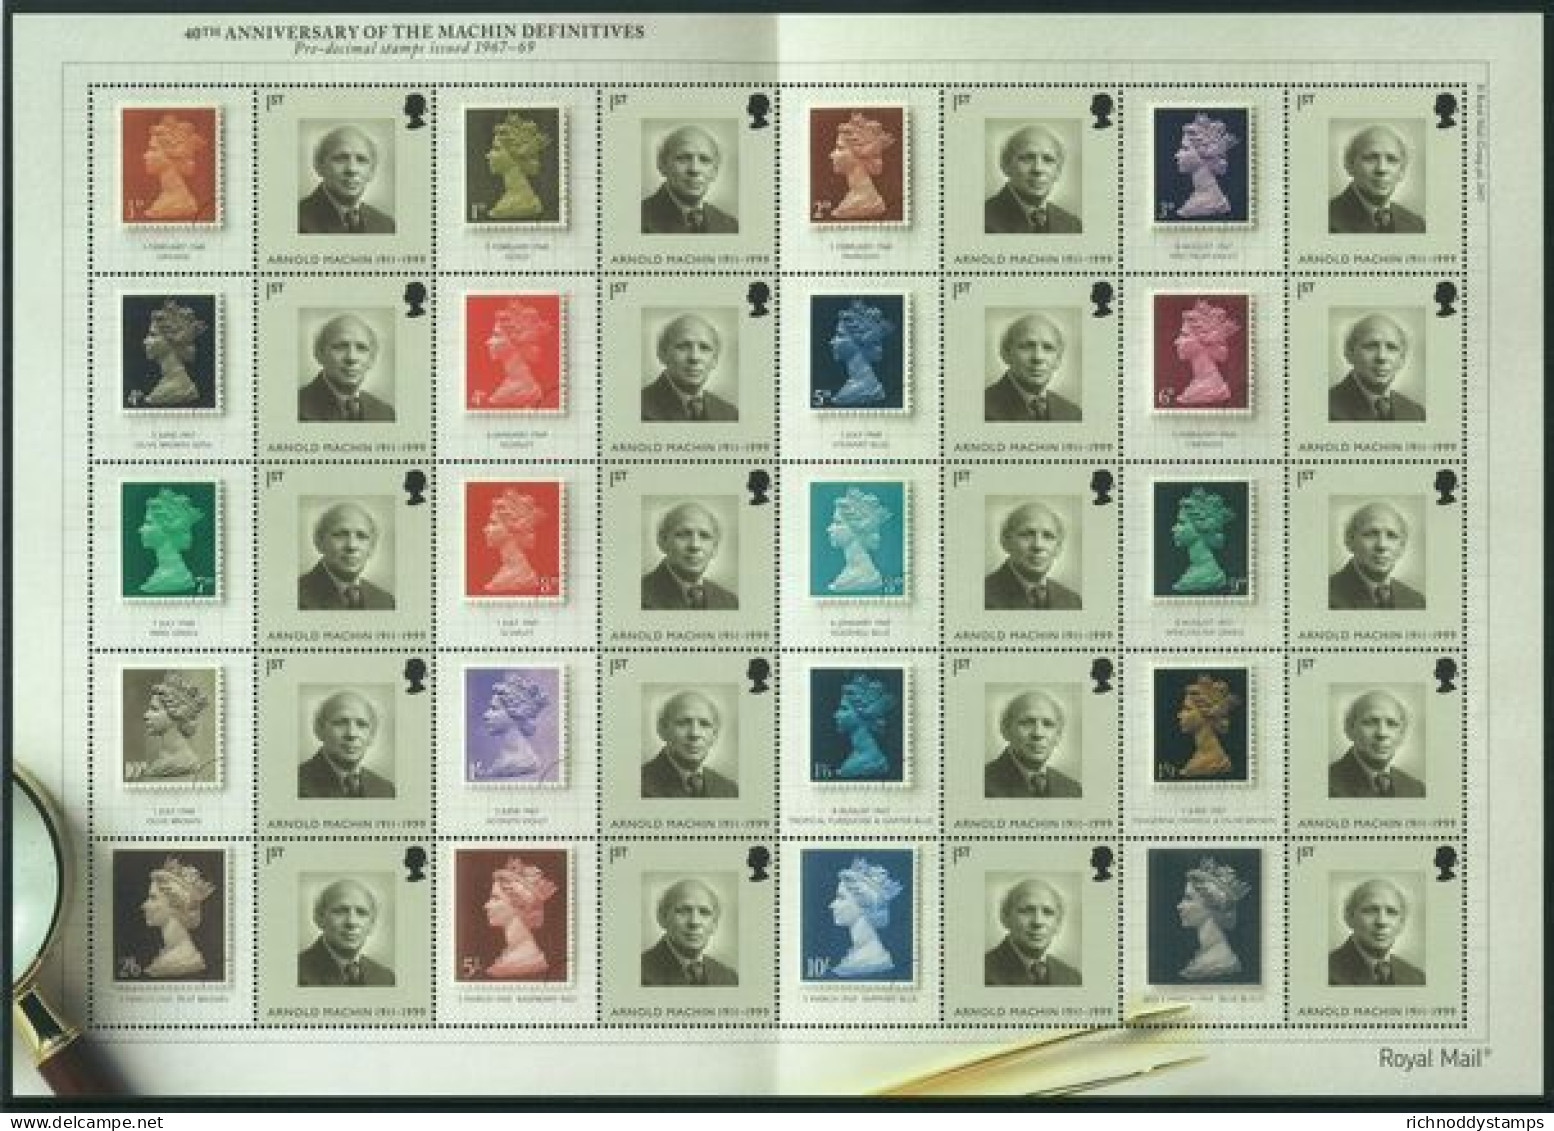 2007 40th Anniversay Of The First Machin Definitive Smilers Sheet Unmounted Mint.  - Smilers Sheets